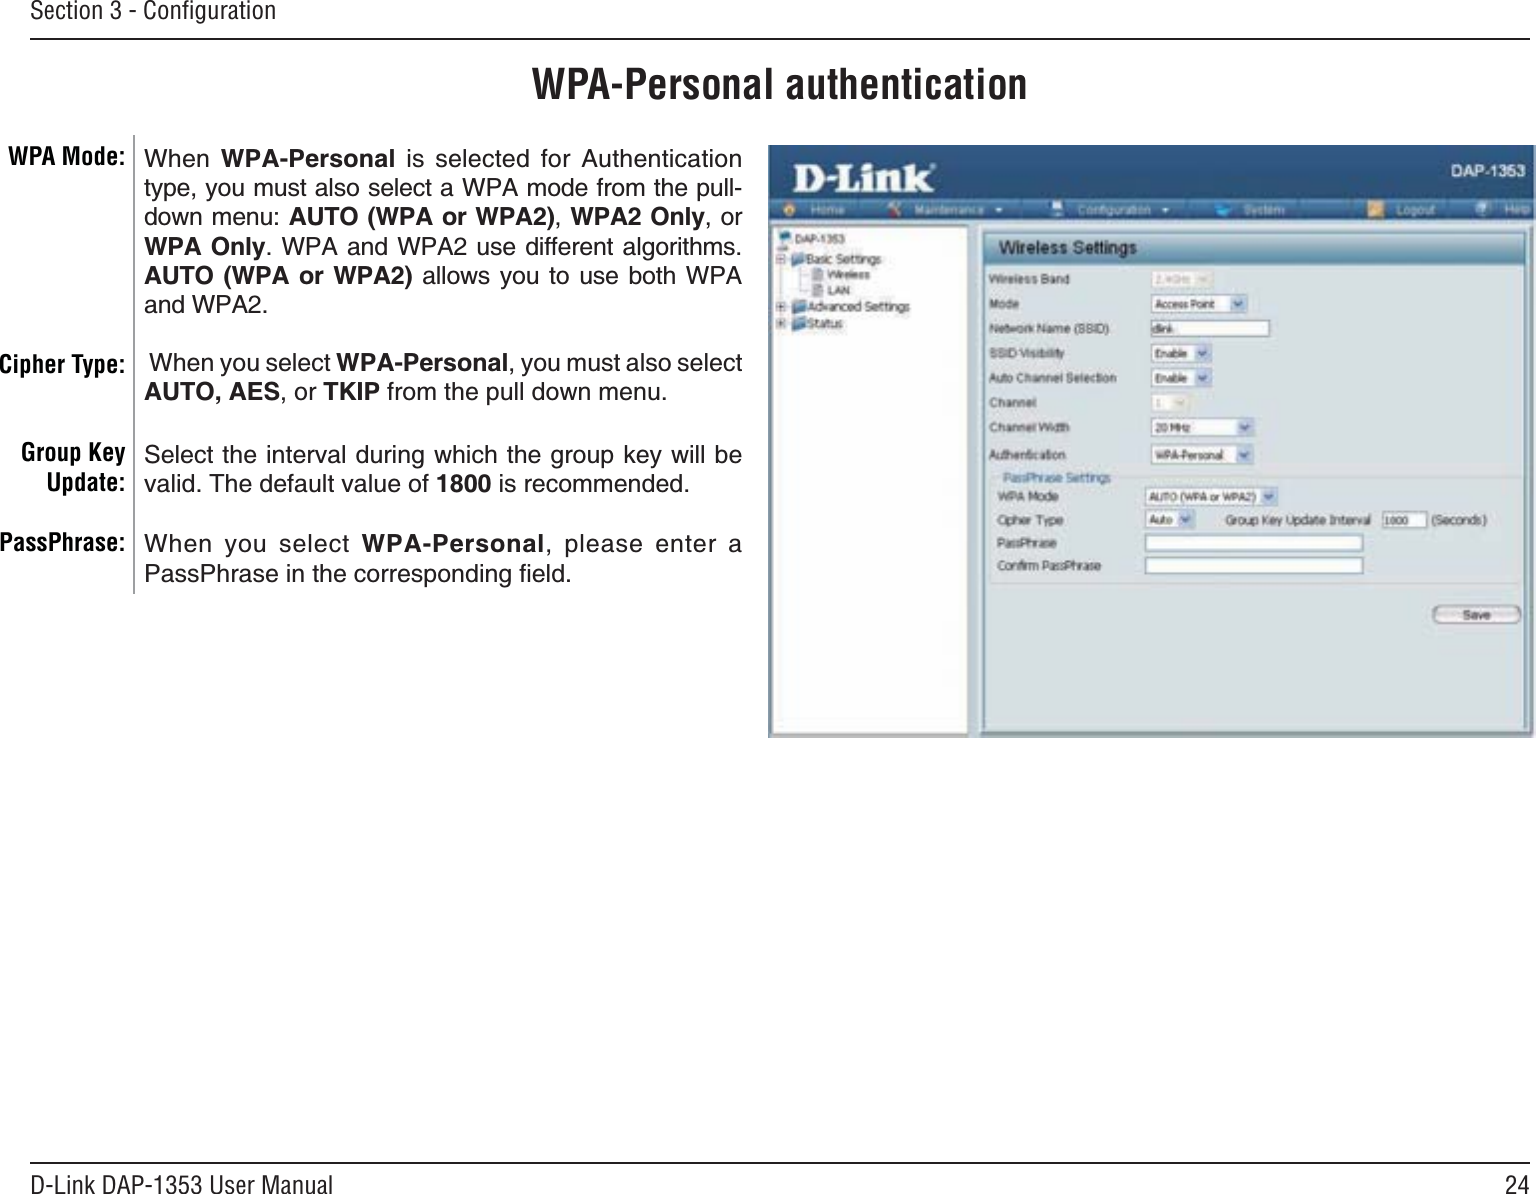 24D-Link DAP-1353 User ManualSection 3 - ConﬁgurationWPA-Personal authenticationWhen  WPA-Personal is selected for Authentication type, you must also select a WPA mode from the pull-FQYPOGPWAUTO (WPA or WPA2),WPA2 Only, or WPA Only. WPA and WPA2 use different algorithms. AUTO (WPA or WPA2) CNNQYU [QW VQ WUG DQVJ 92#and WPA2. When you select WPA-Personal, you must also select AUTO, AES, or TKIP from the pull down menu.5GNGEVVJGKPVGTXCNFWTKPIYJKEJVJGITQWRMG[YKNNDGvalid. The default value of 1800 is recommended.When you select WPA-Personal, please enter a PassPhrase KPVJGEQTTGURQPFKPIſGNFWPA Mode: Cipher Type:Group Key Update:PassPhrase: